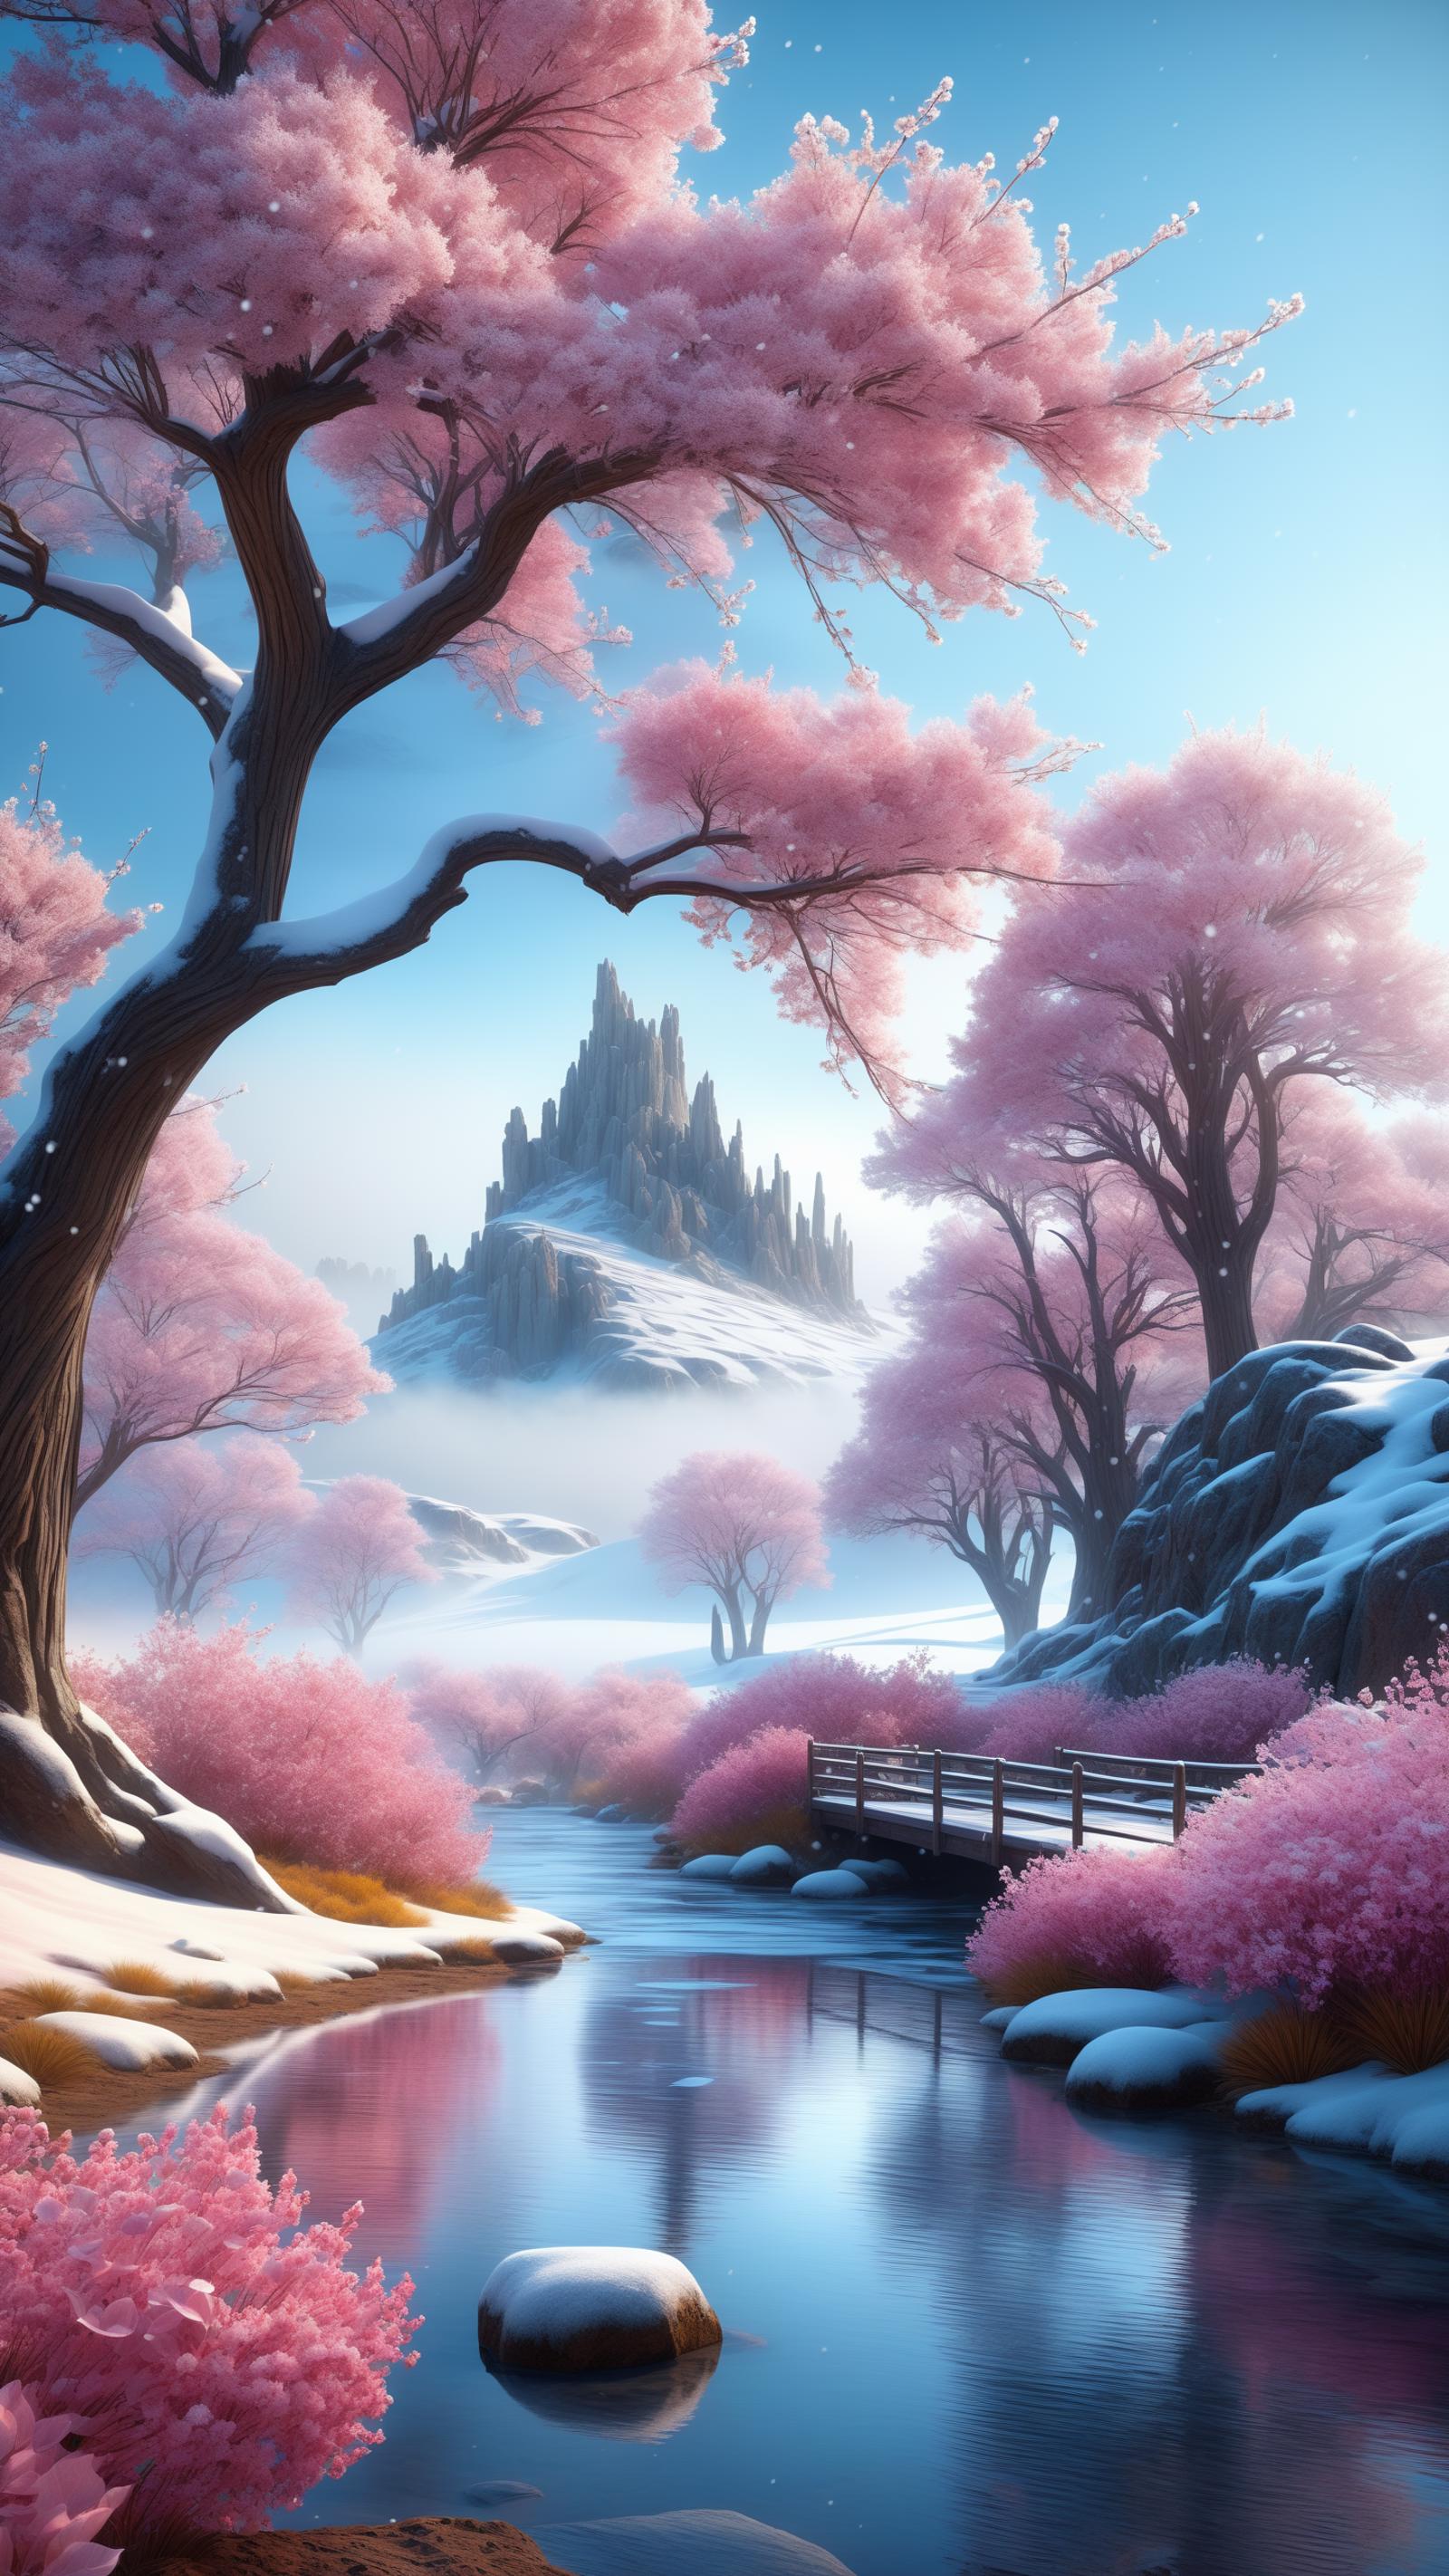 A picturesque scene of a castle in the snow with a bridge and pink flowers.